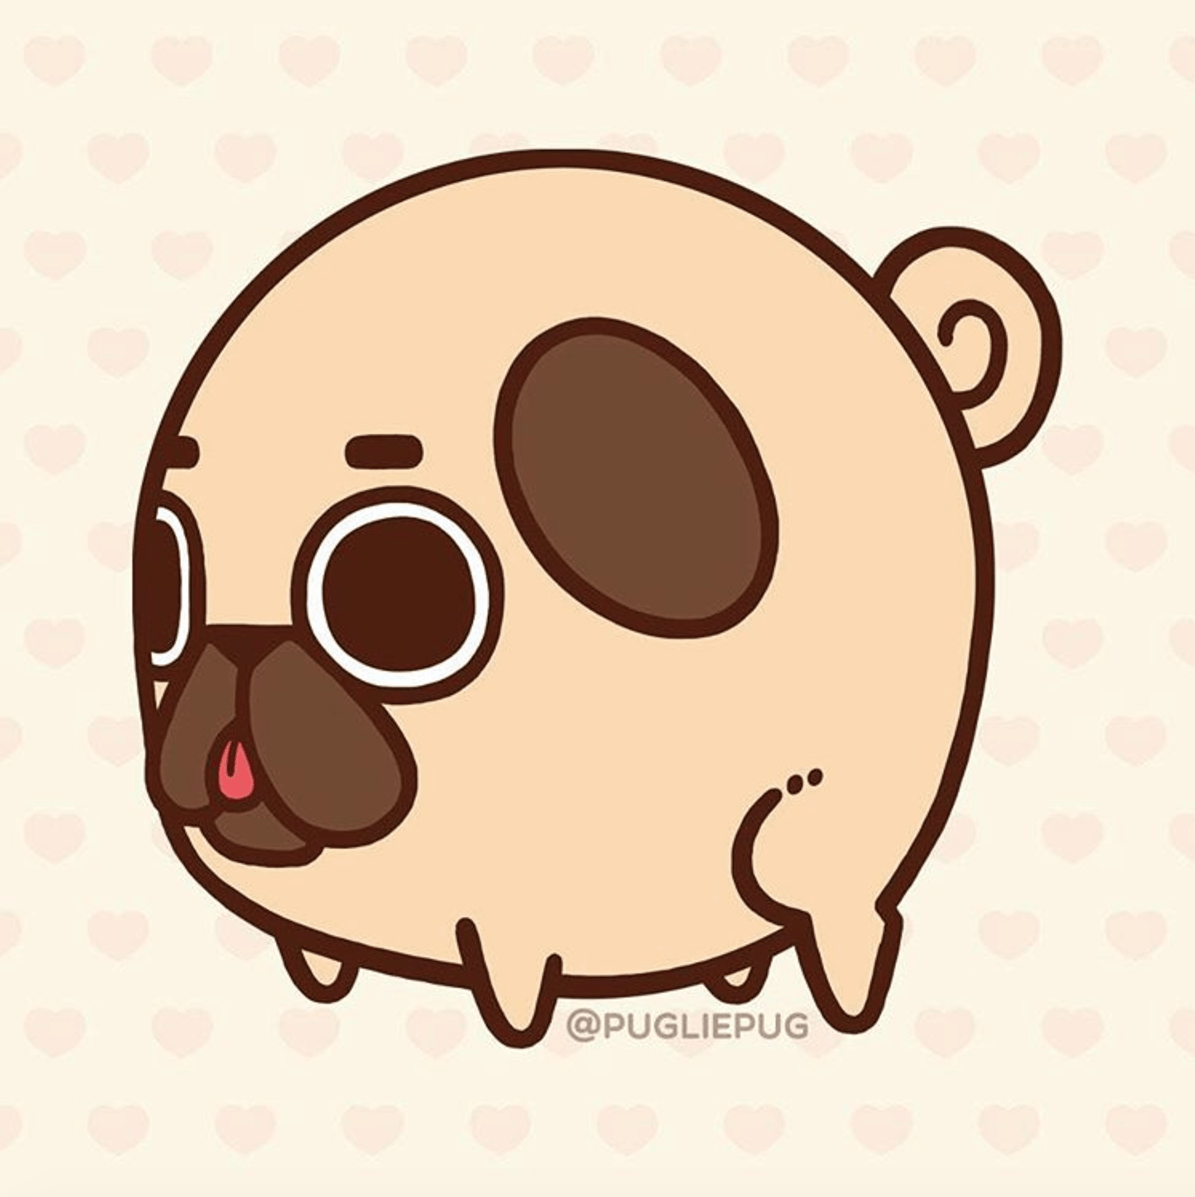 Meet Puglie Pug Get Leashed Magazine Cute And Sweet Little Bunny